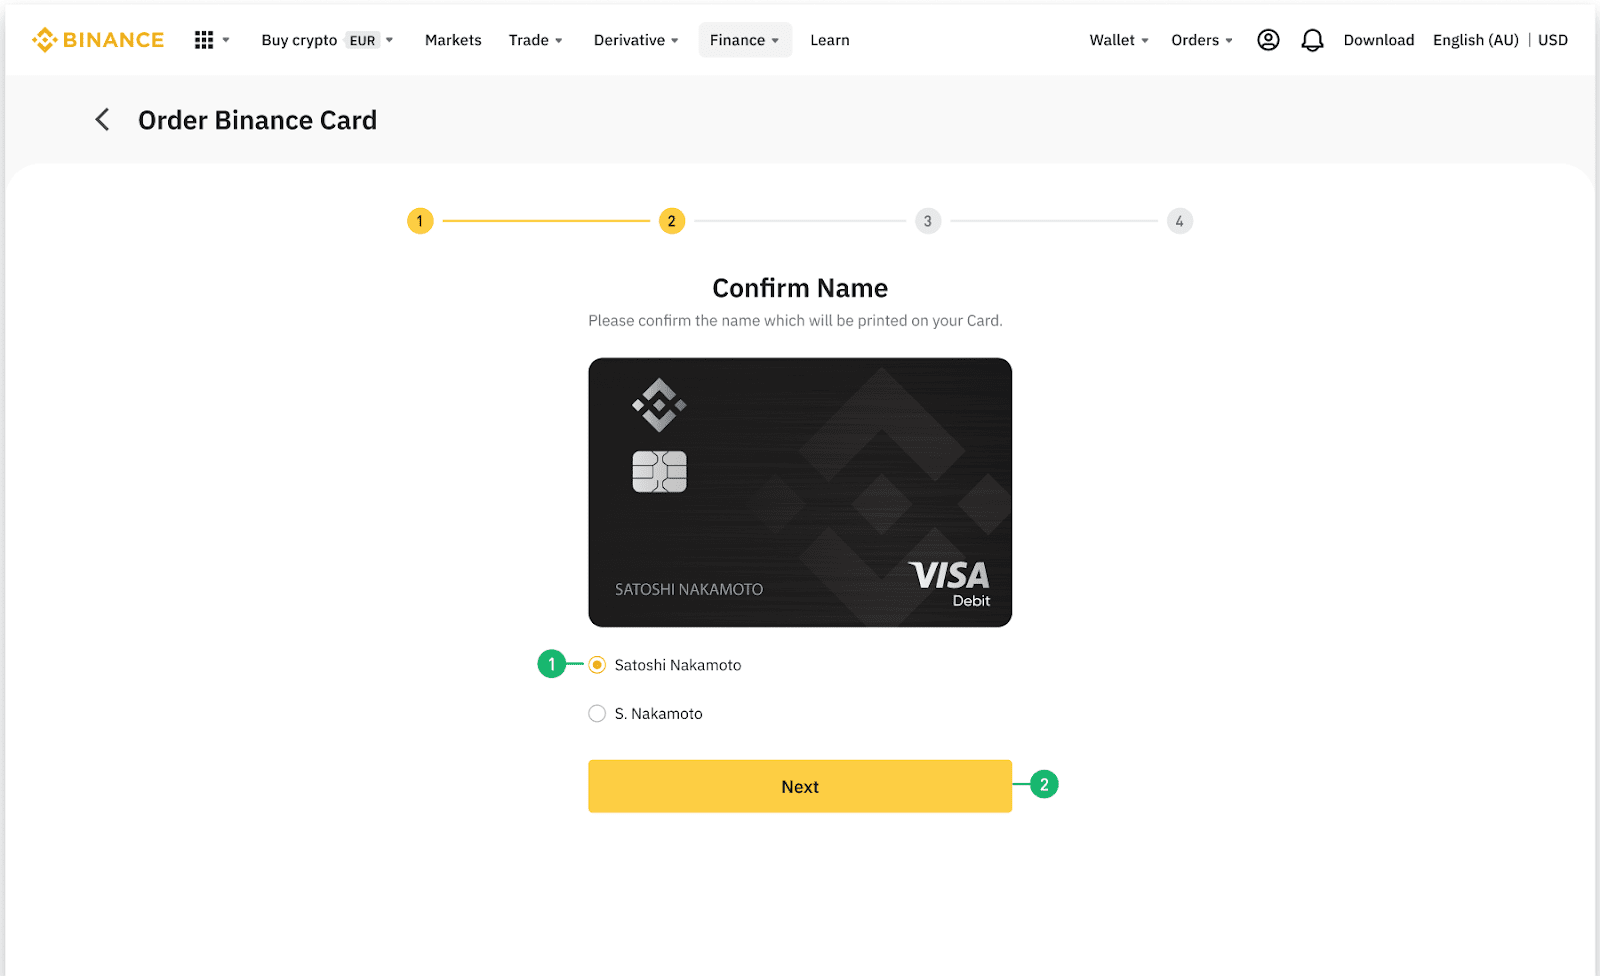 Image: How to get a Binance card